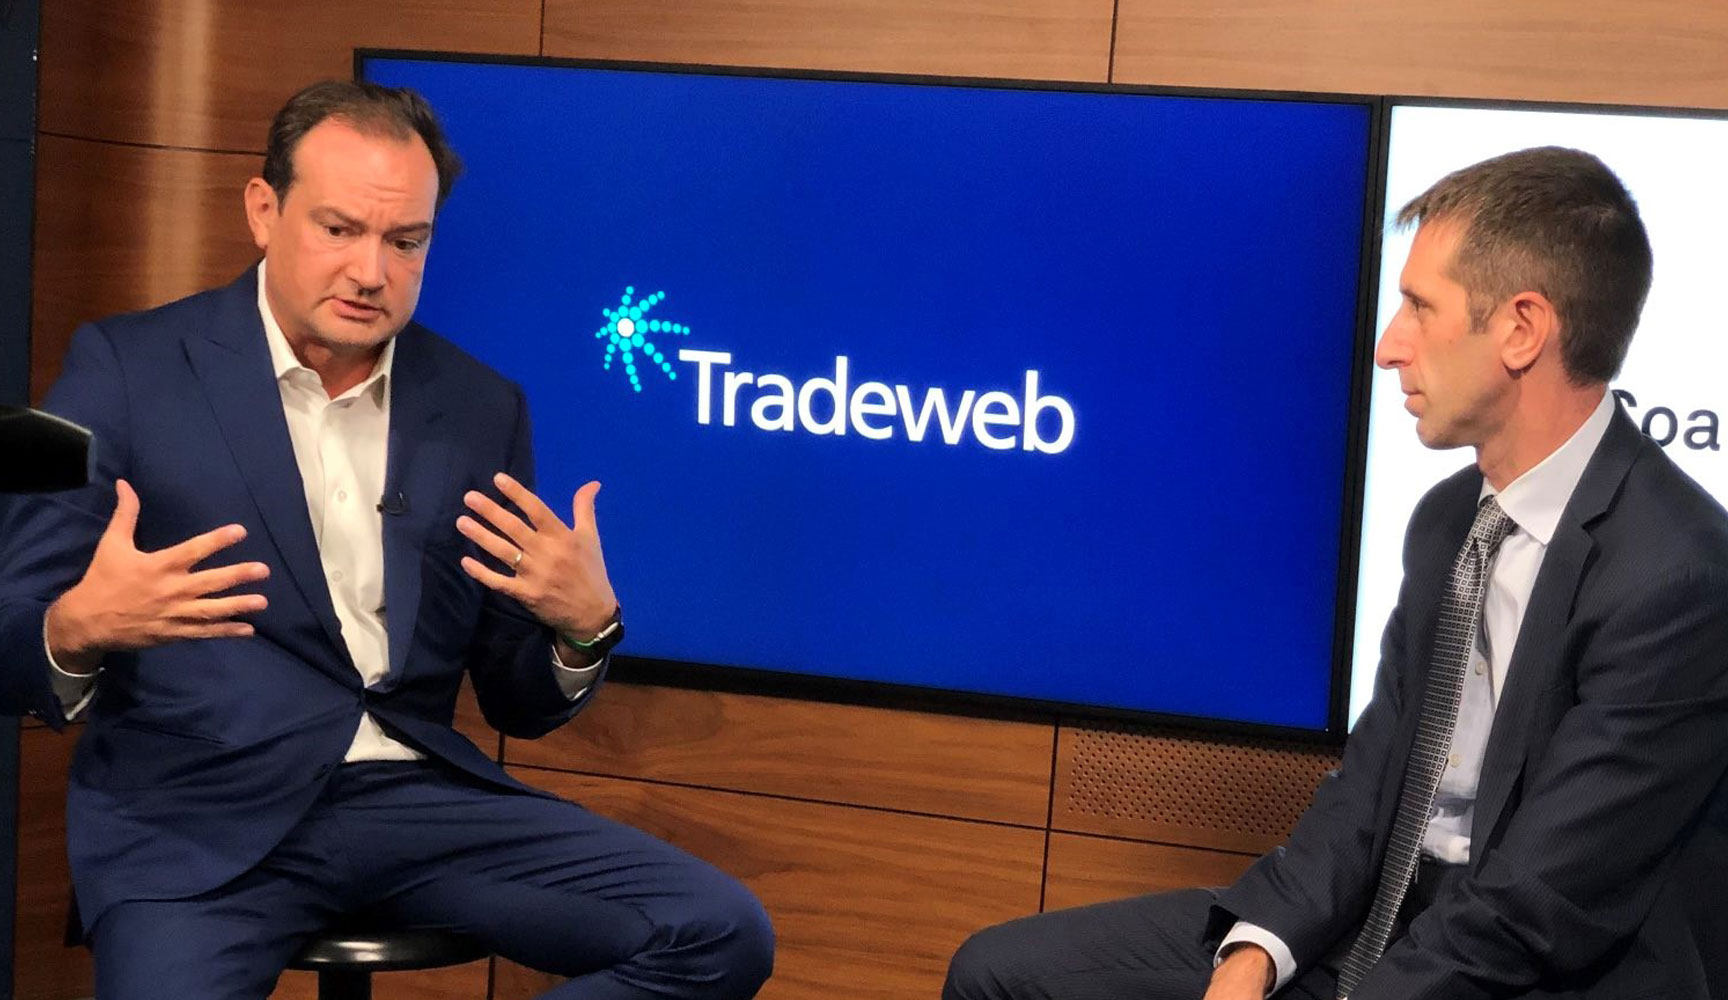 Replay link for Greenwich webinar on the Evolving U.S. Treasury Market with Tradeweb President Billy Hult